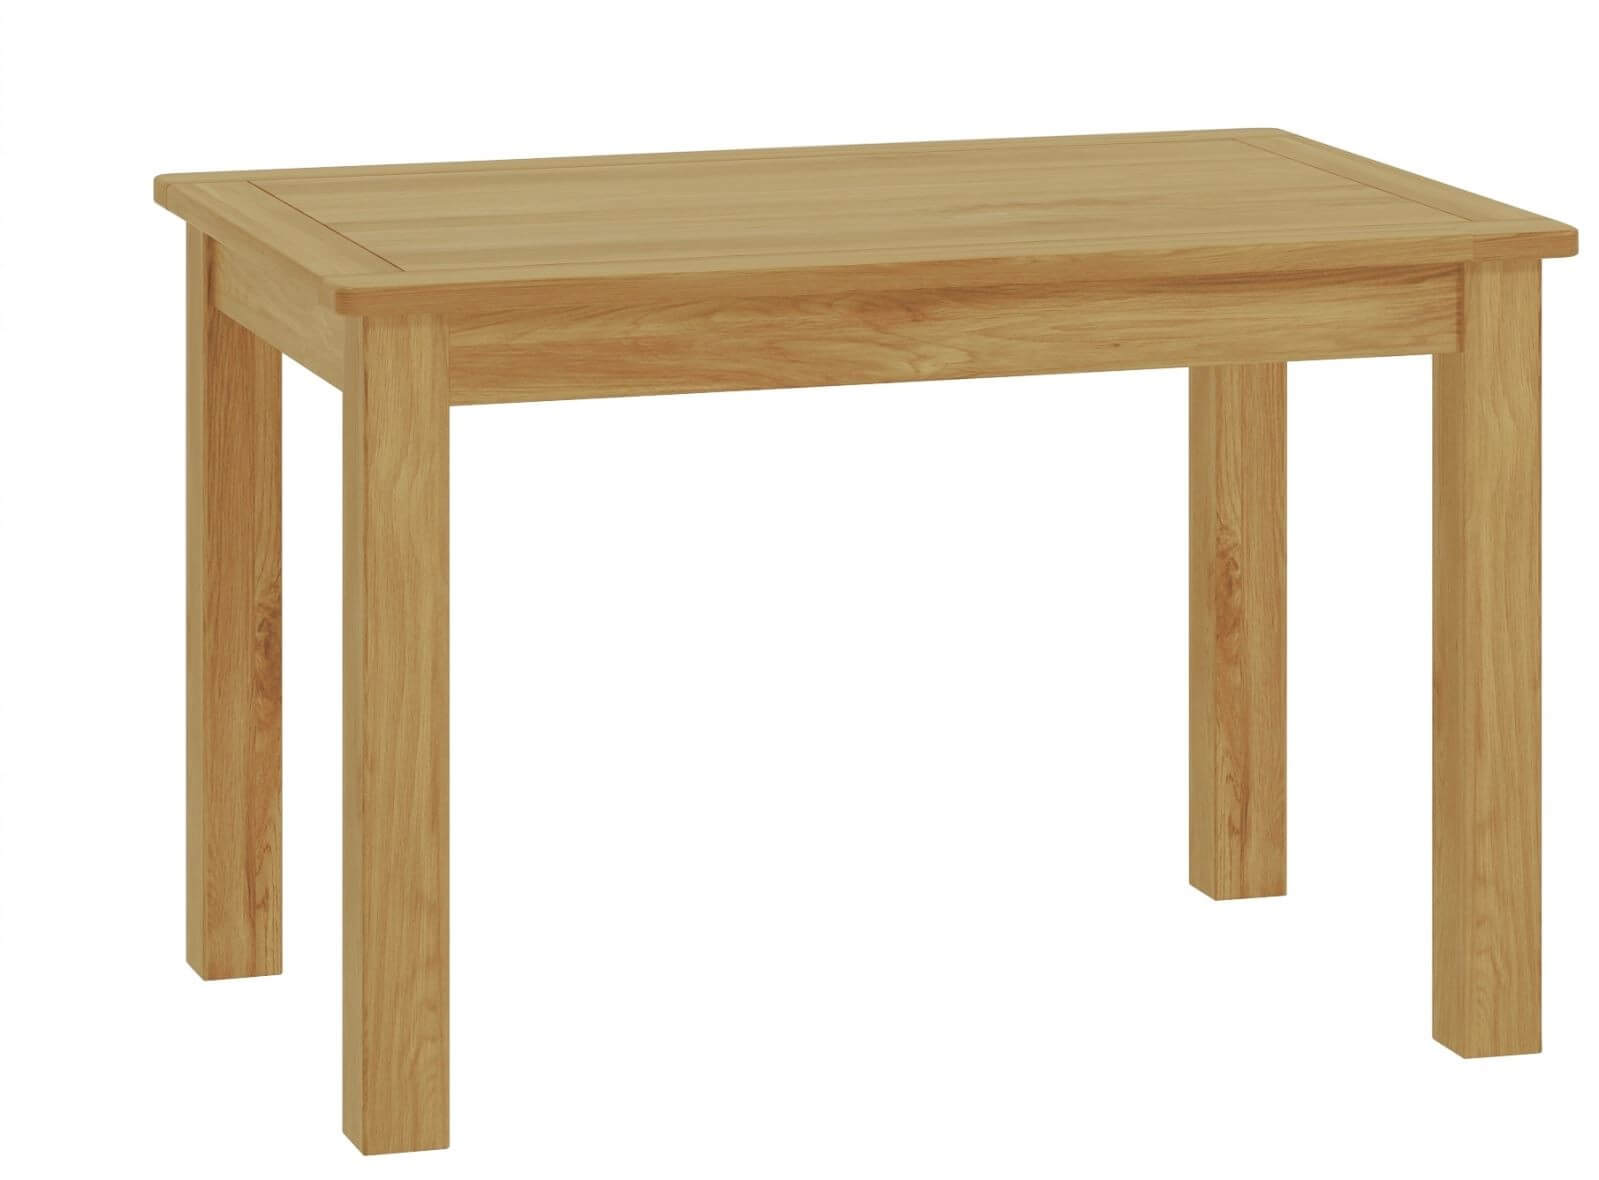 Showing image for Seattle dining table - oak